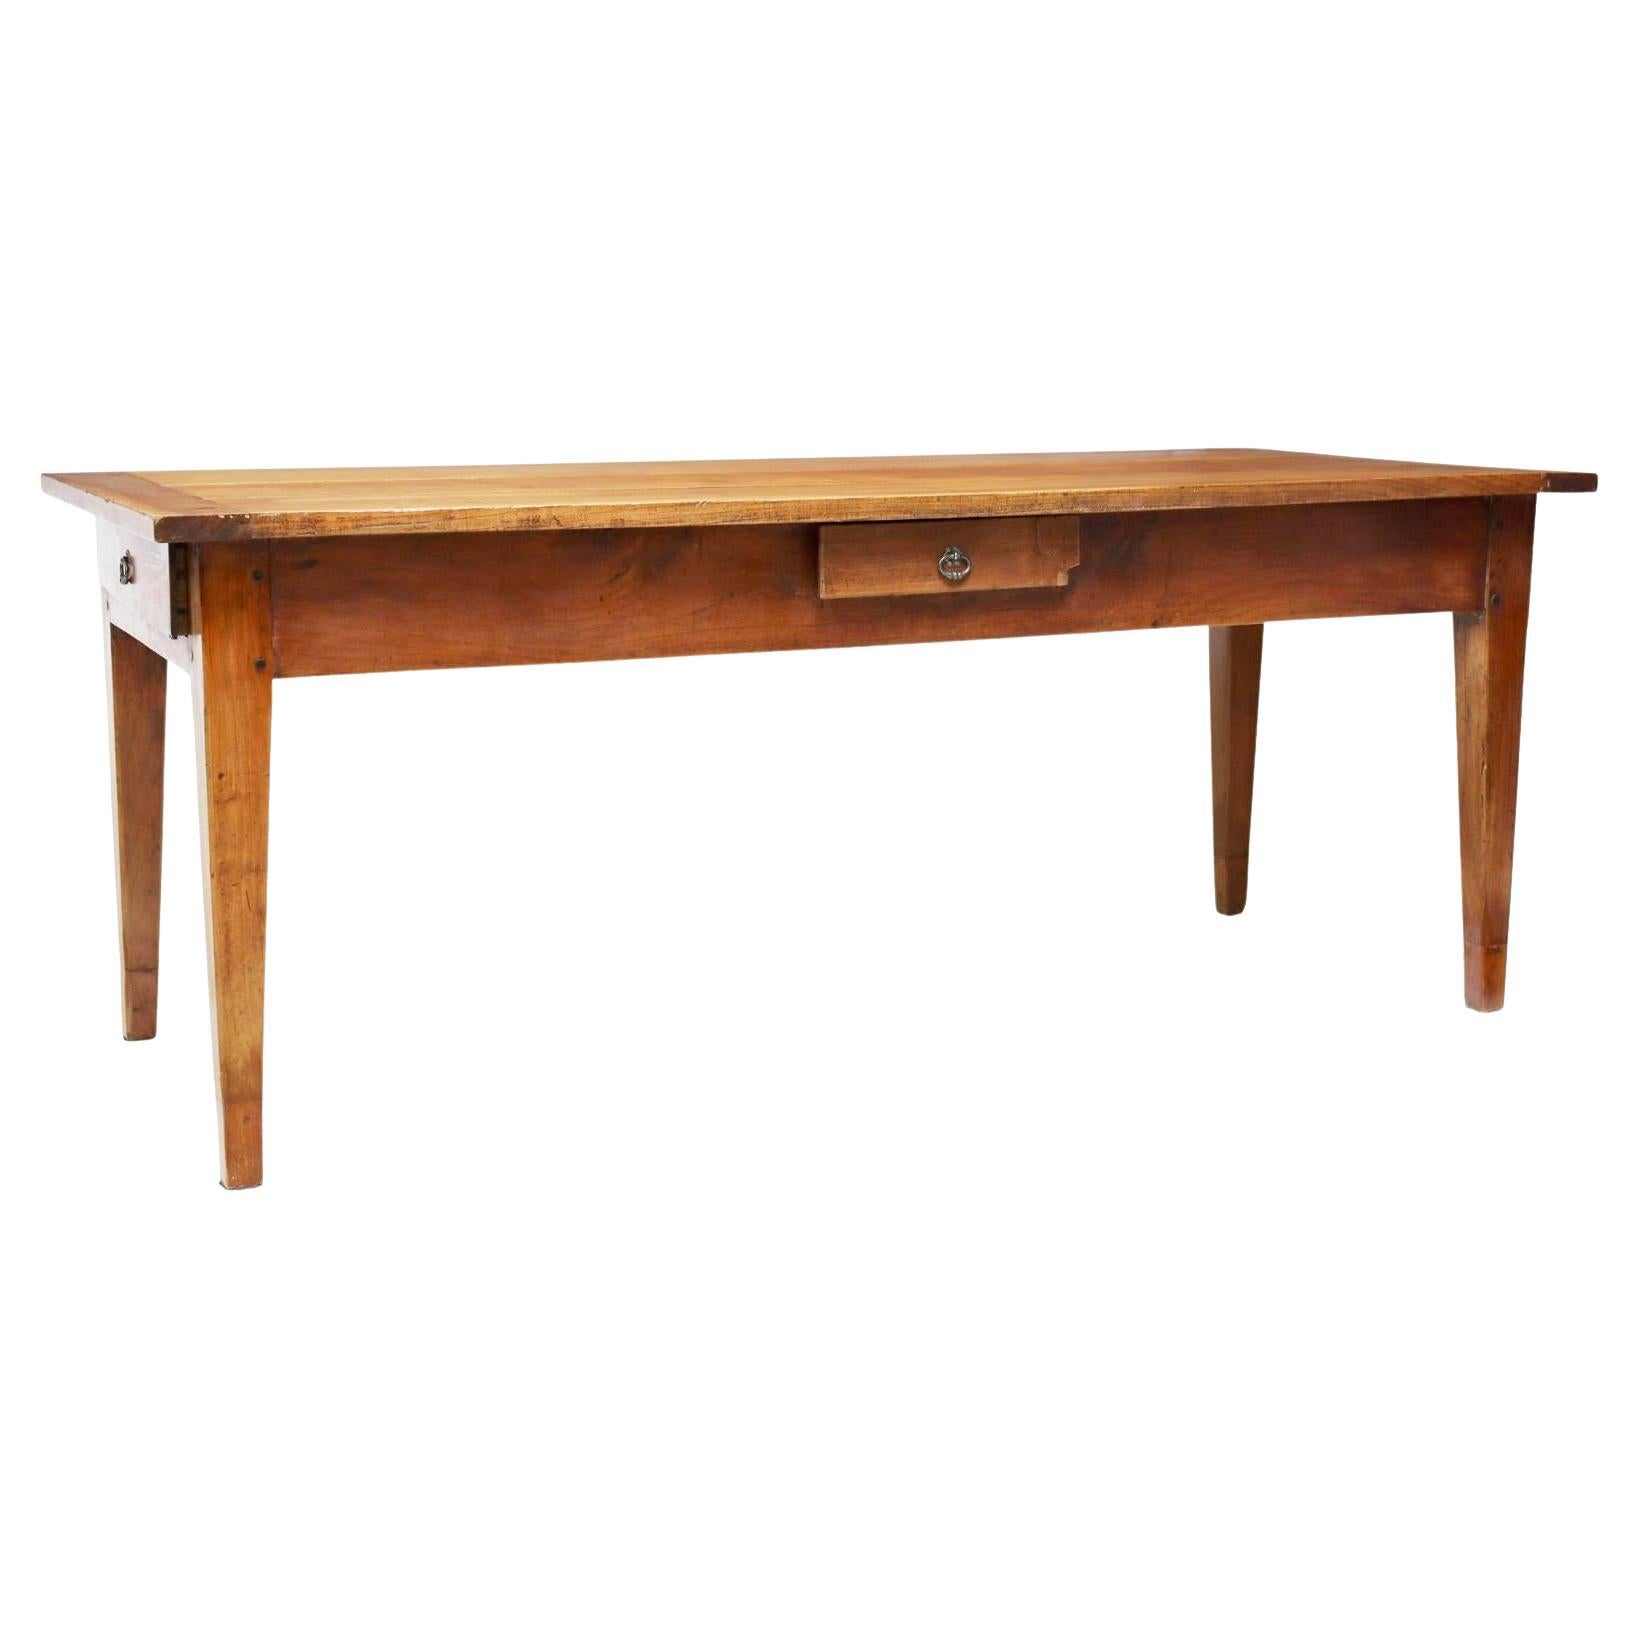 French Provincial fruitwood farmhouse table, early 20th c., having rectangular plank top, over apron fitted with three drawers, rising on tapered legs. Gorgeous color and patina.
Note: one drawer with old repair and small loss at corner (see